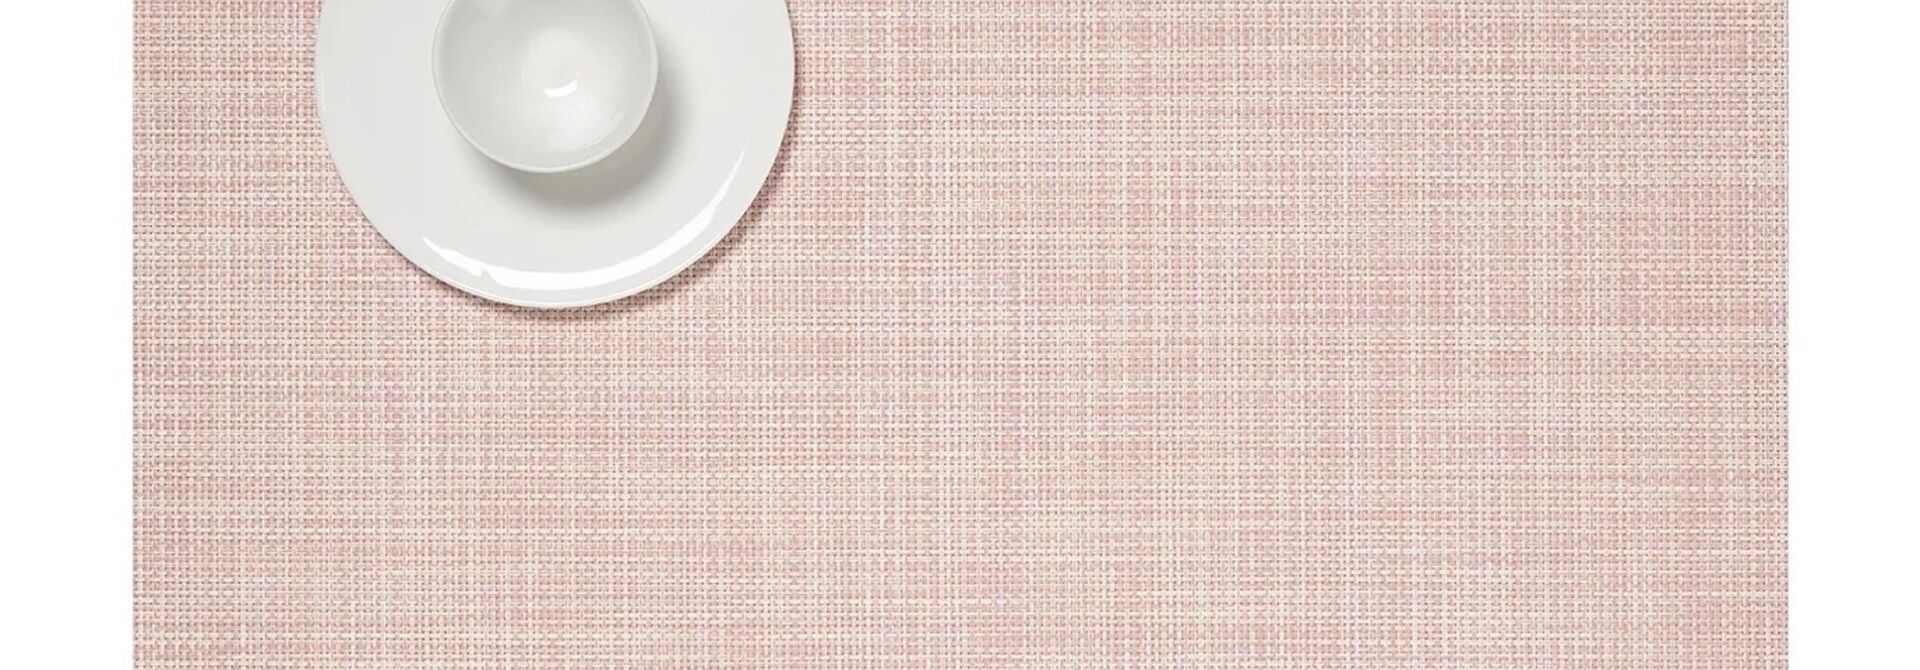 Mini Basketweave | The Kaleidoscope Rectangle Placemat Collection